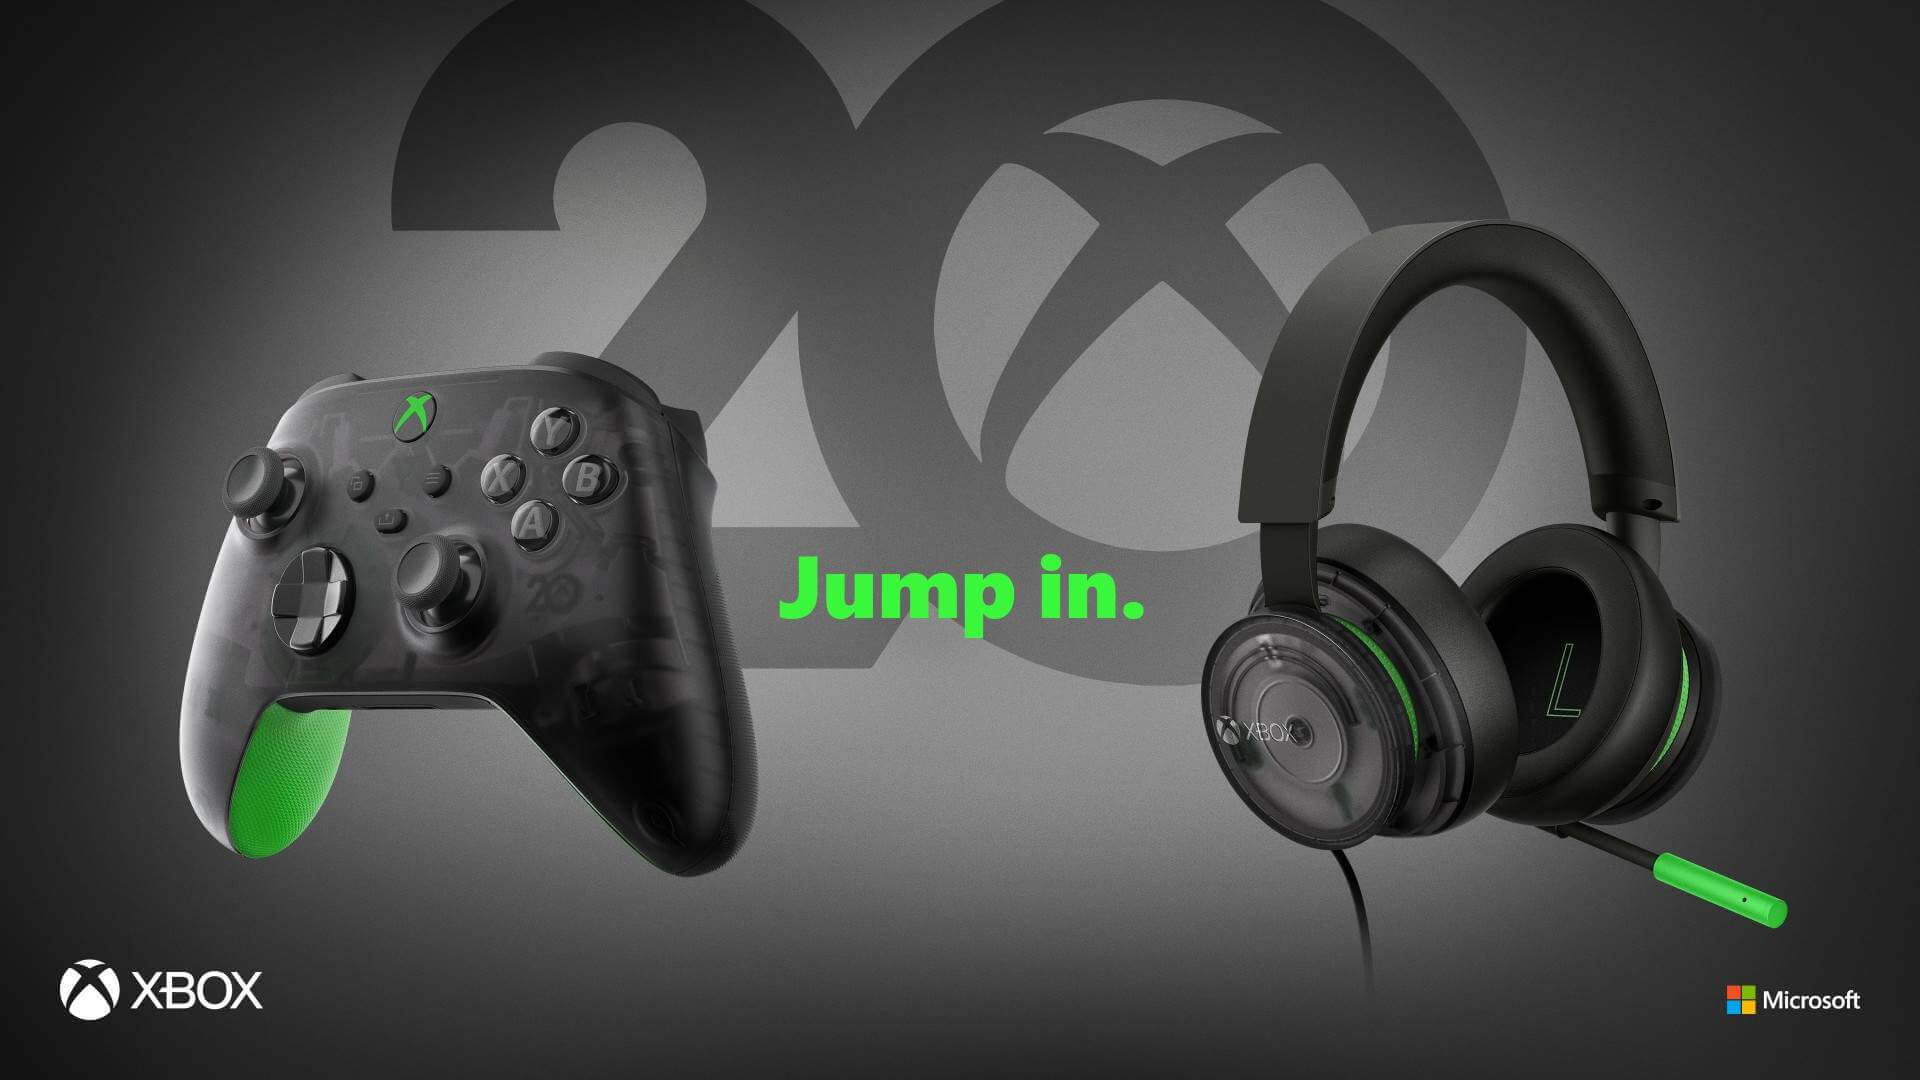 The new Xbox 20th Anniversary hardware: a controller and a headset